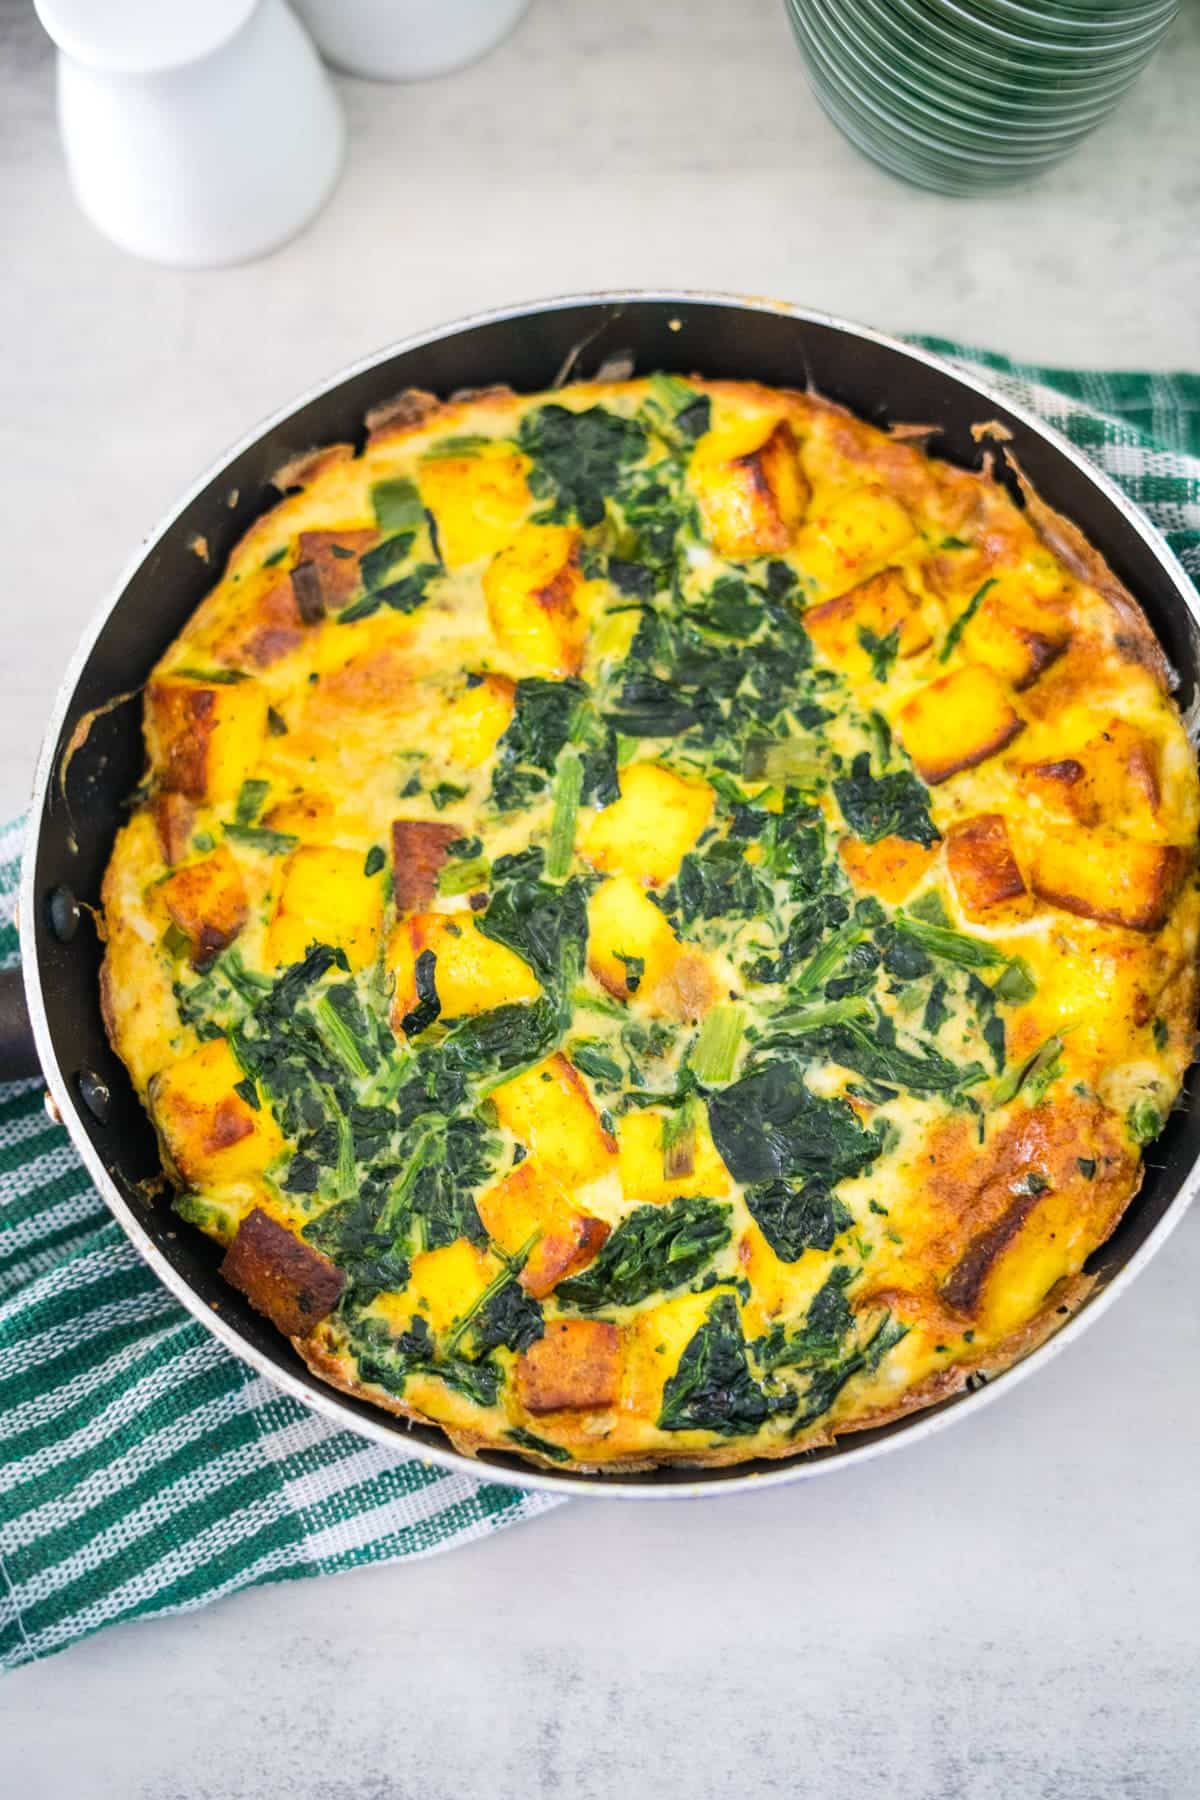 A quiche with spinach and potatoes in a skillet.